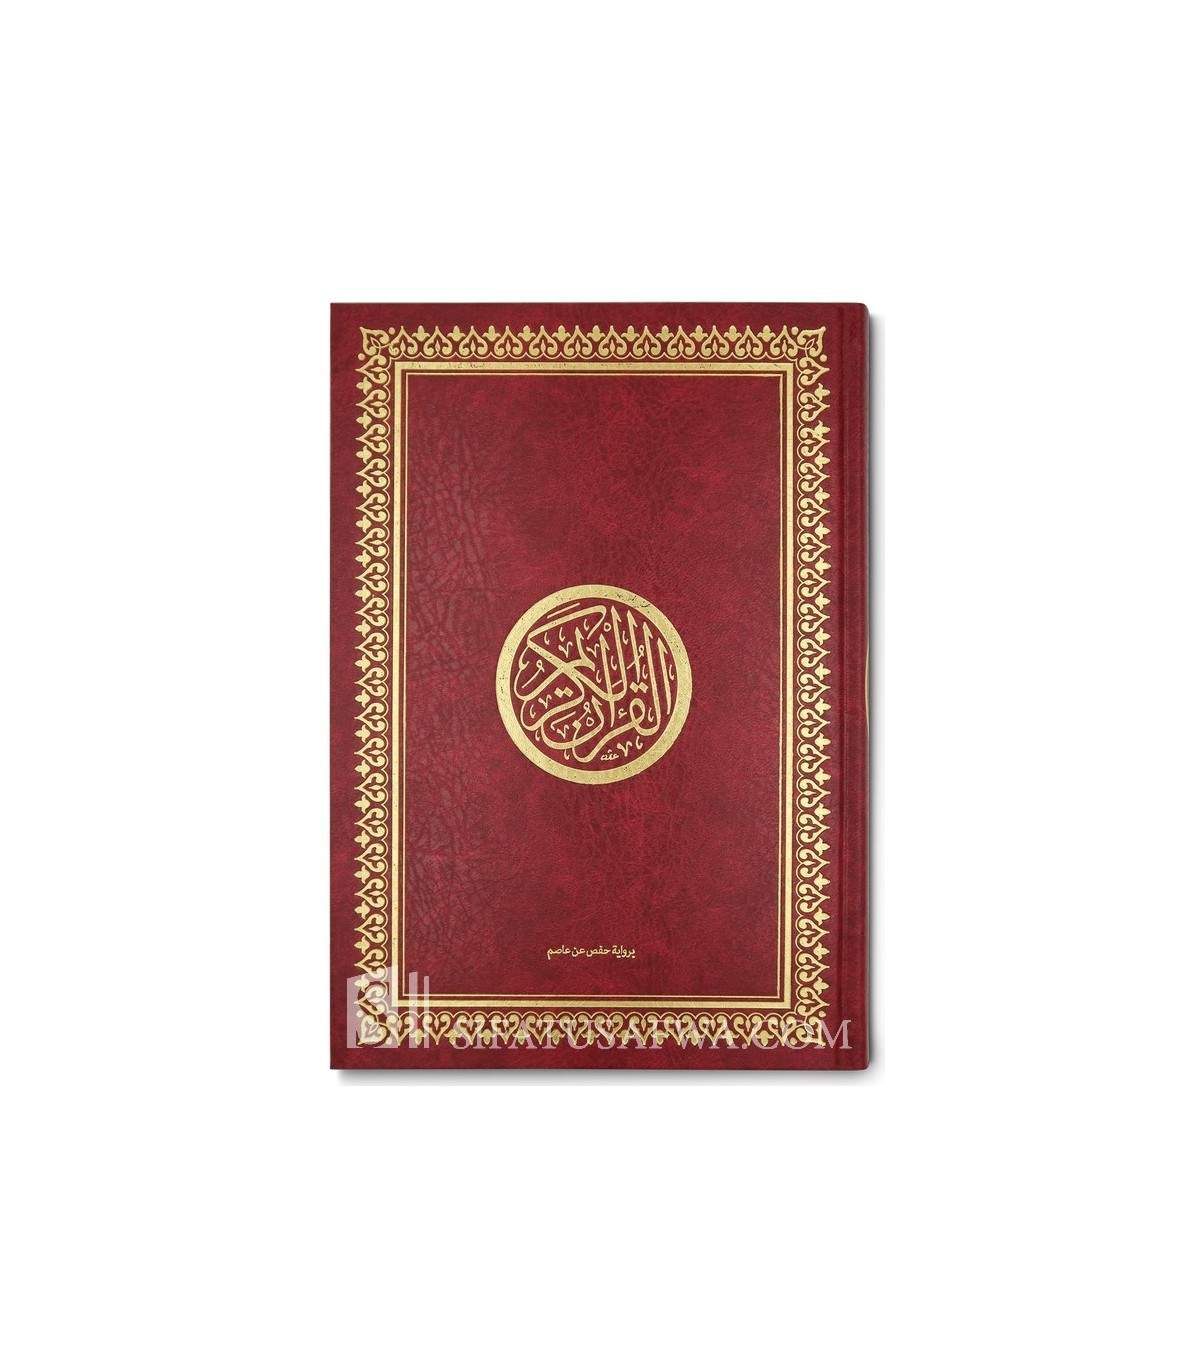 Quran Large Size - Finishing Red Leather and Gilding (17x24cm)